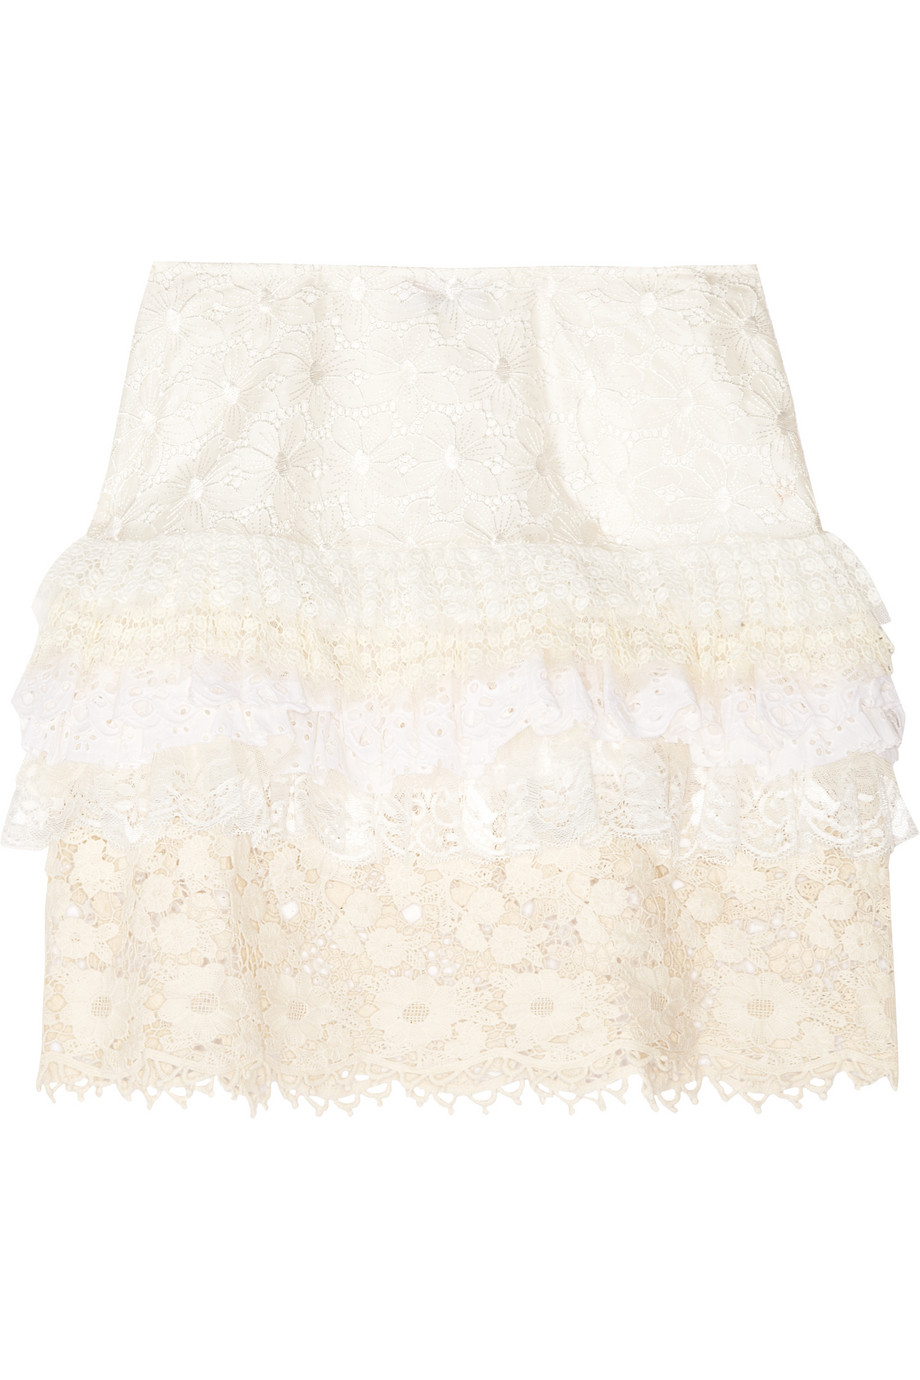 Lyst - Red Valentino Ruffled Silk and Lace Mini Skirt in White